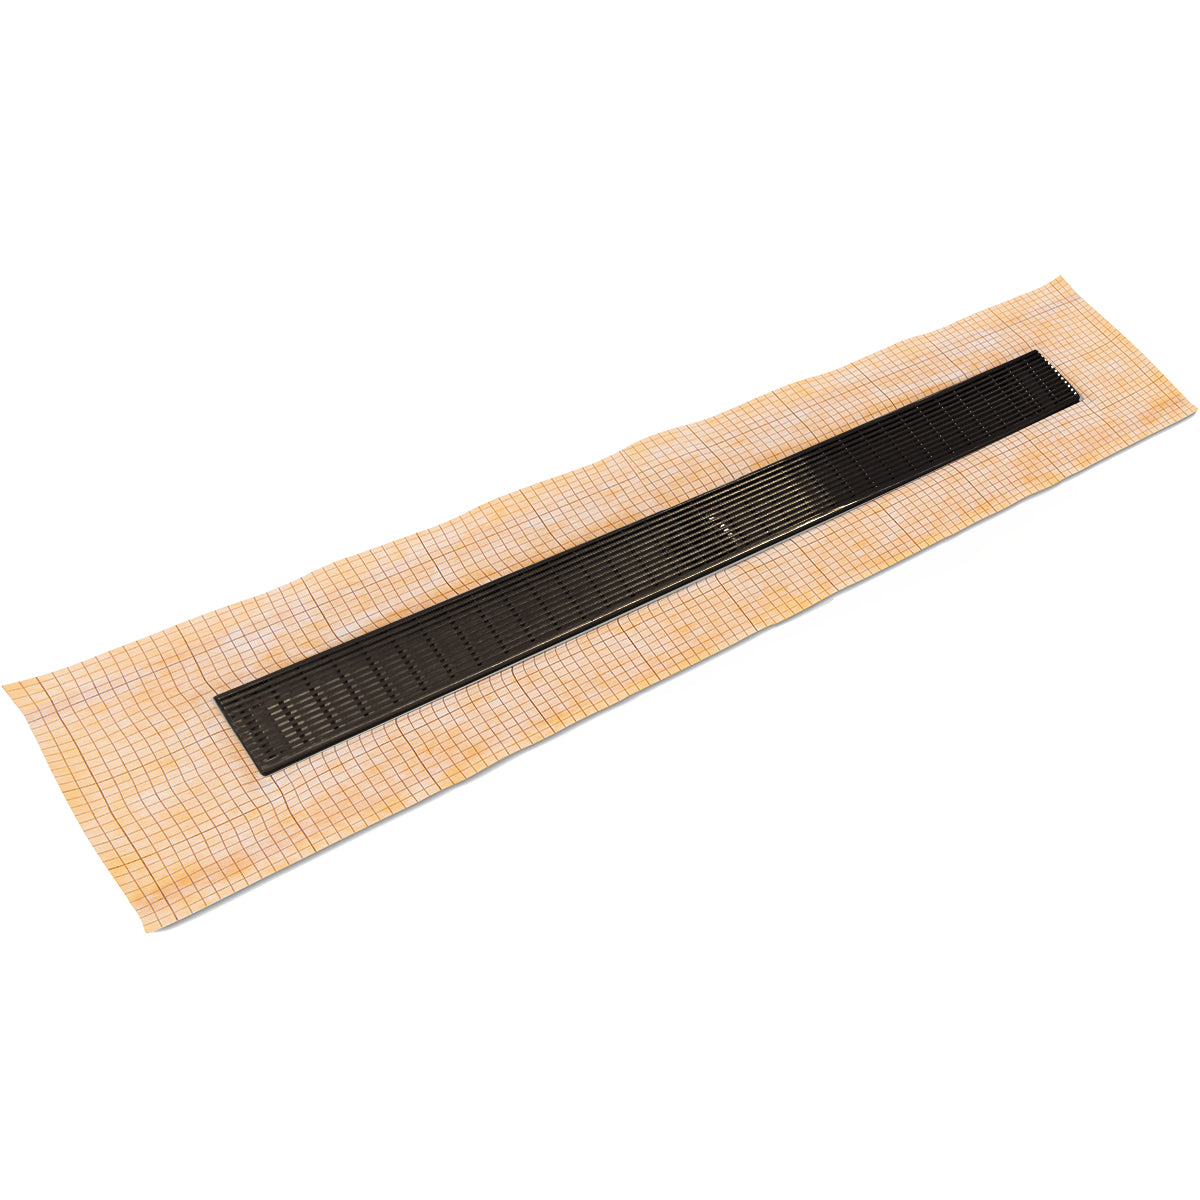 Infinity Drain 42" FCS Series Schluter-Kerdi - Fixed Flange Linear Drain Kit with 2 1/2" Wedge Wire Grate